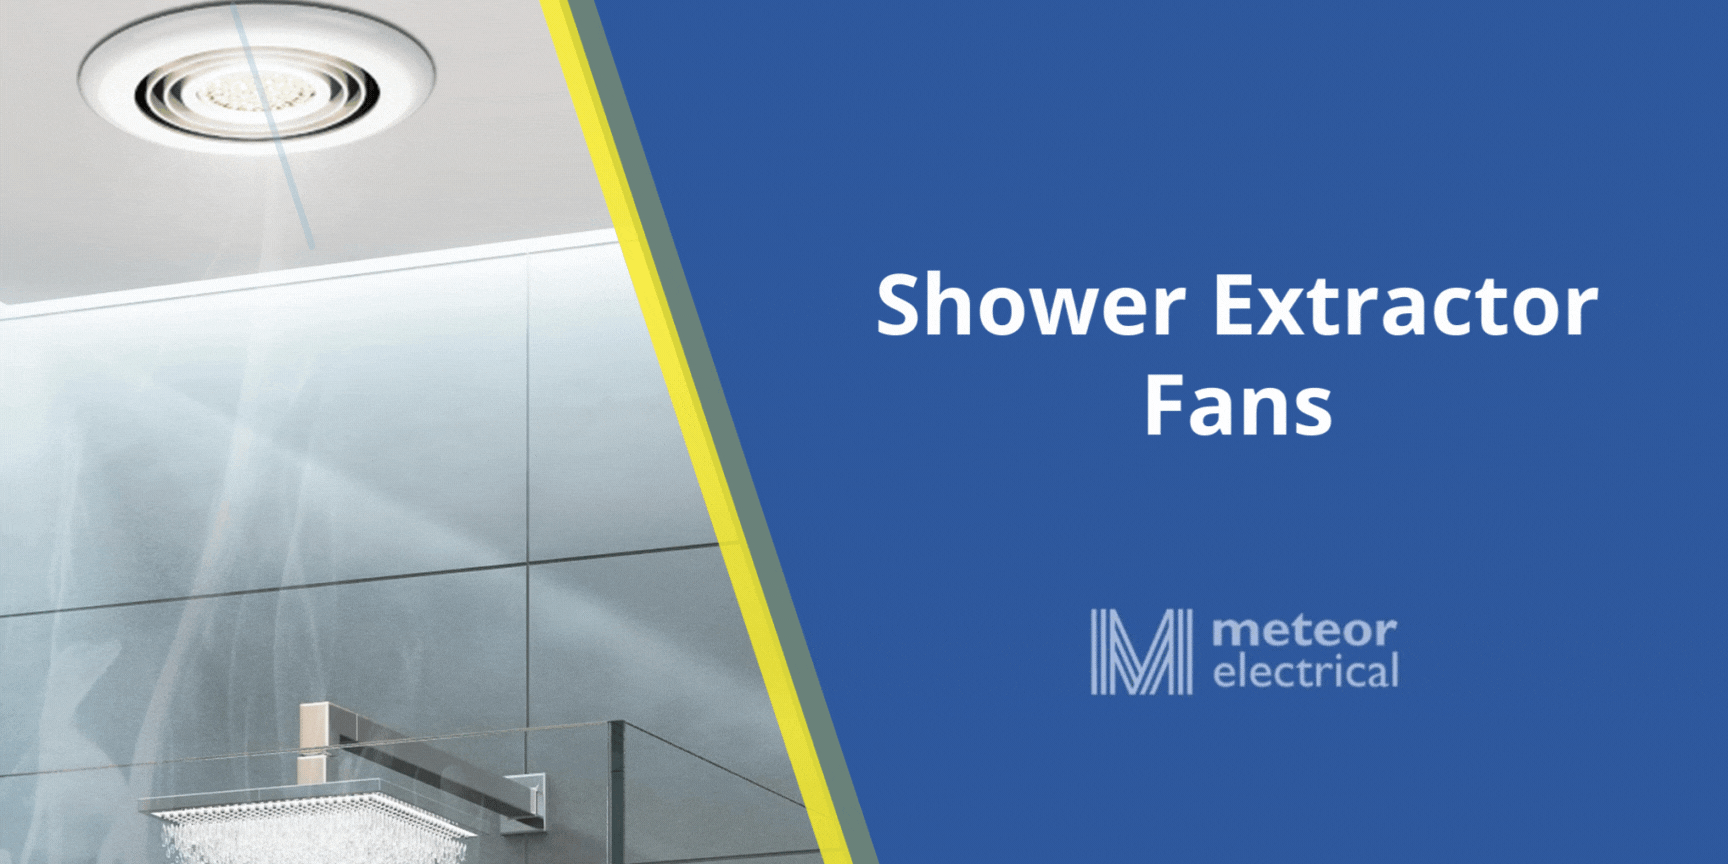 Shower Extractor Fans